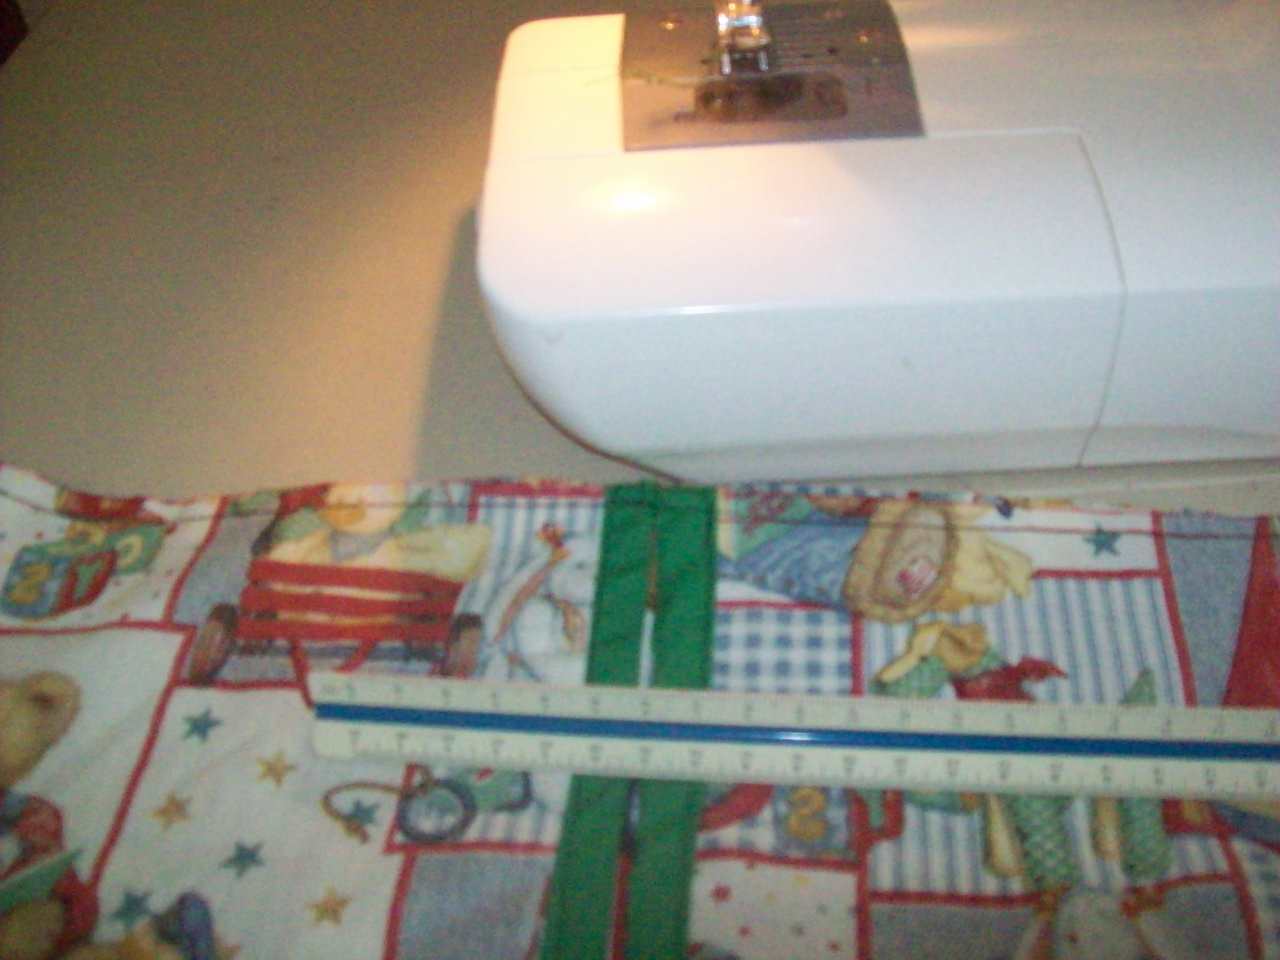 clearing-out-the-closet-diaper-stacker-sewing-pattern-rag-quilt